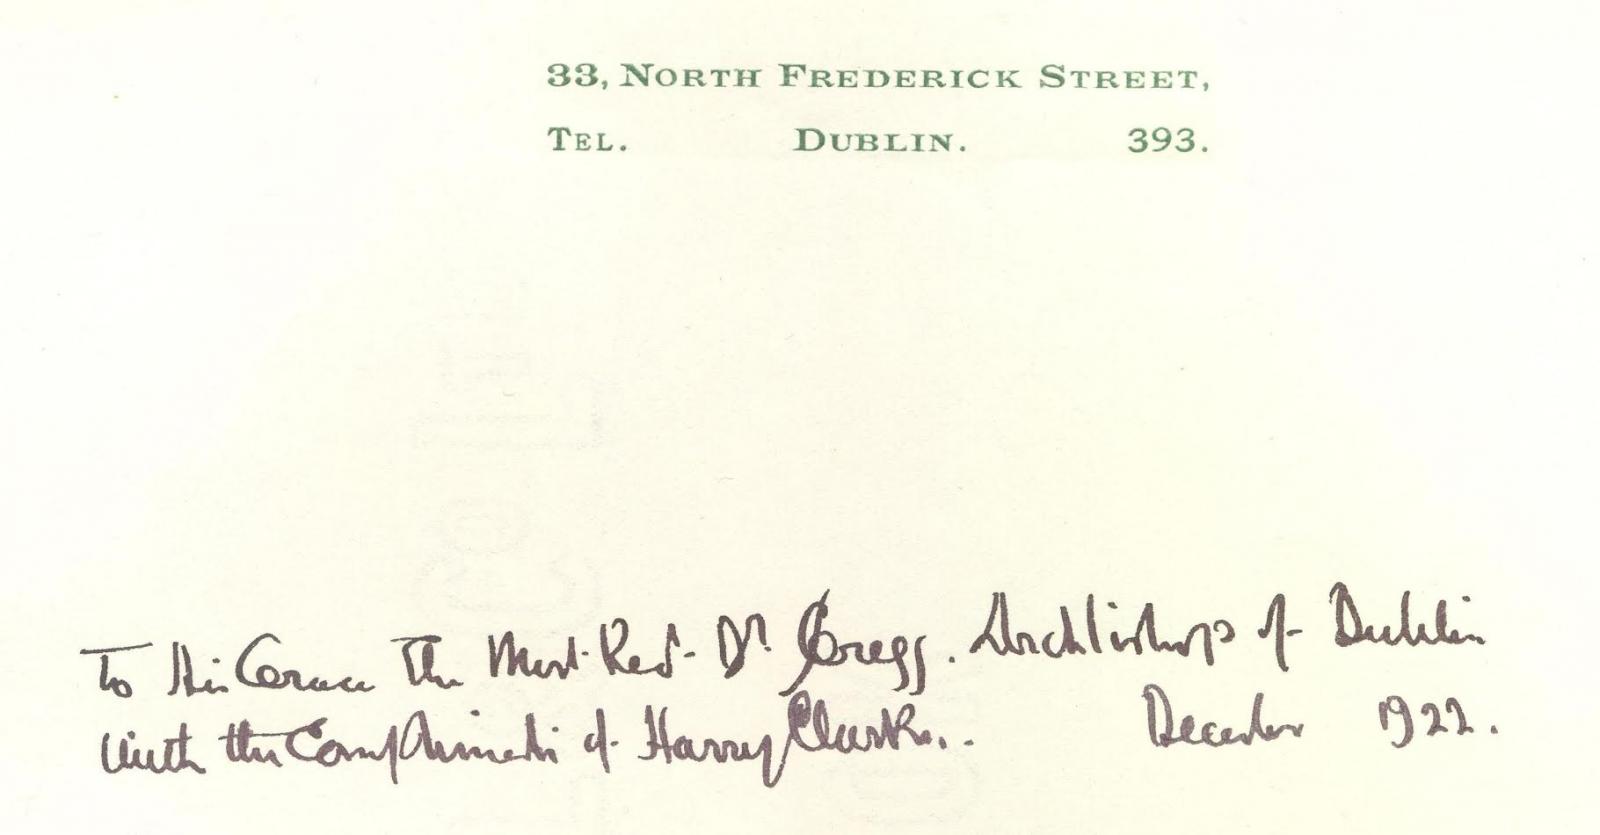 Harry Clarke’s Unique Gift to Former Archbishop of Dublin